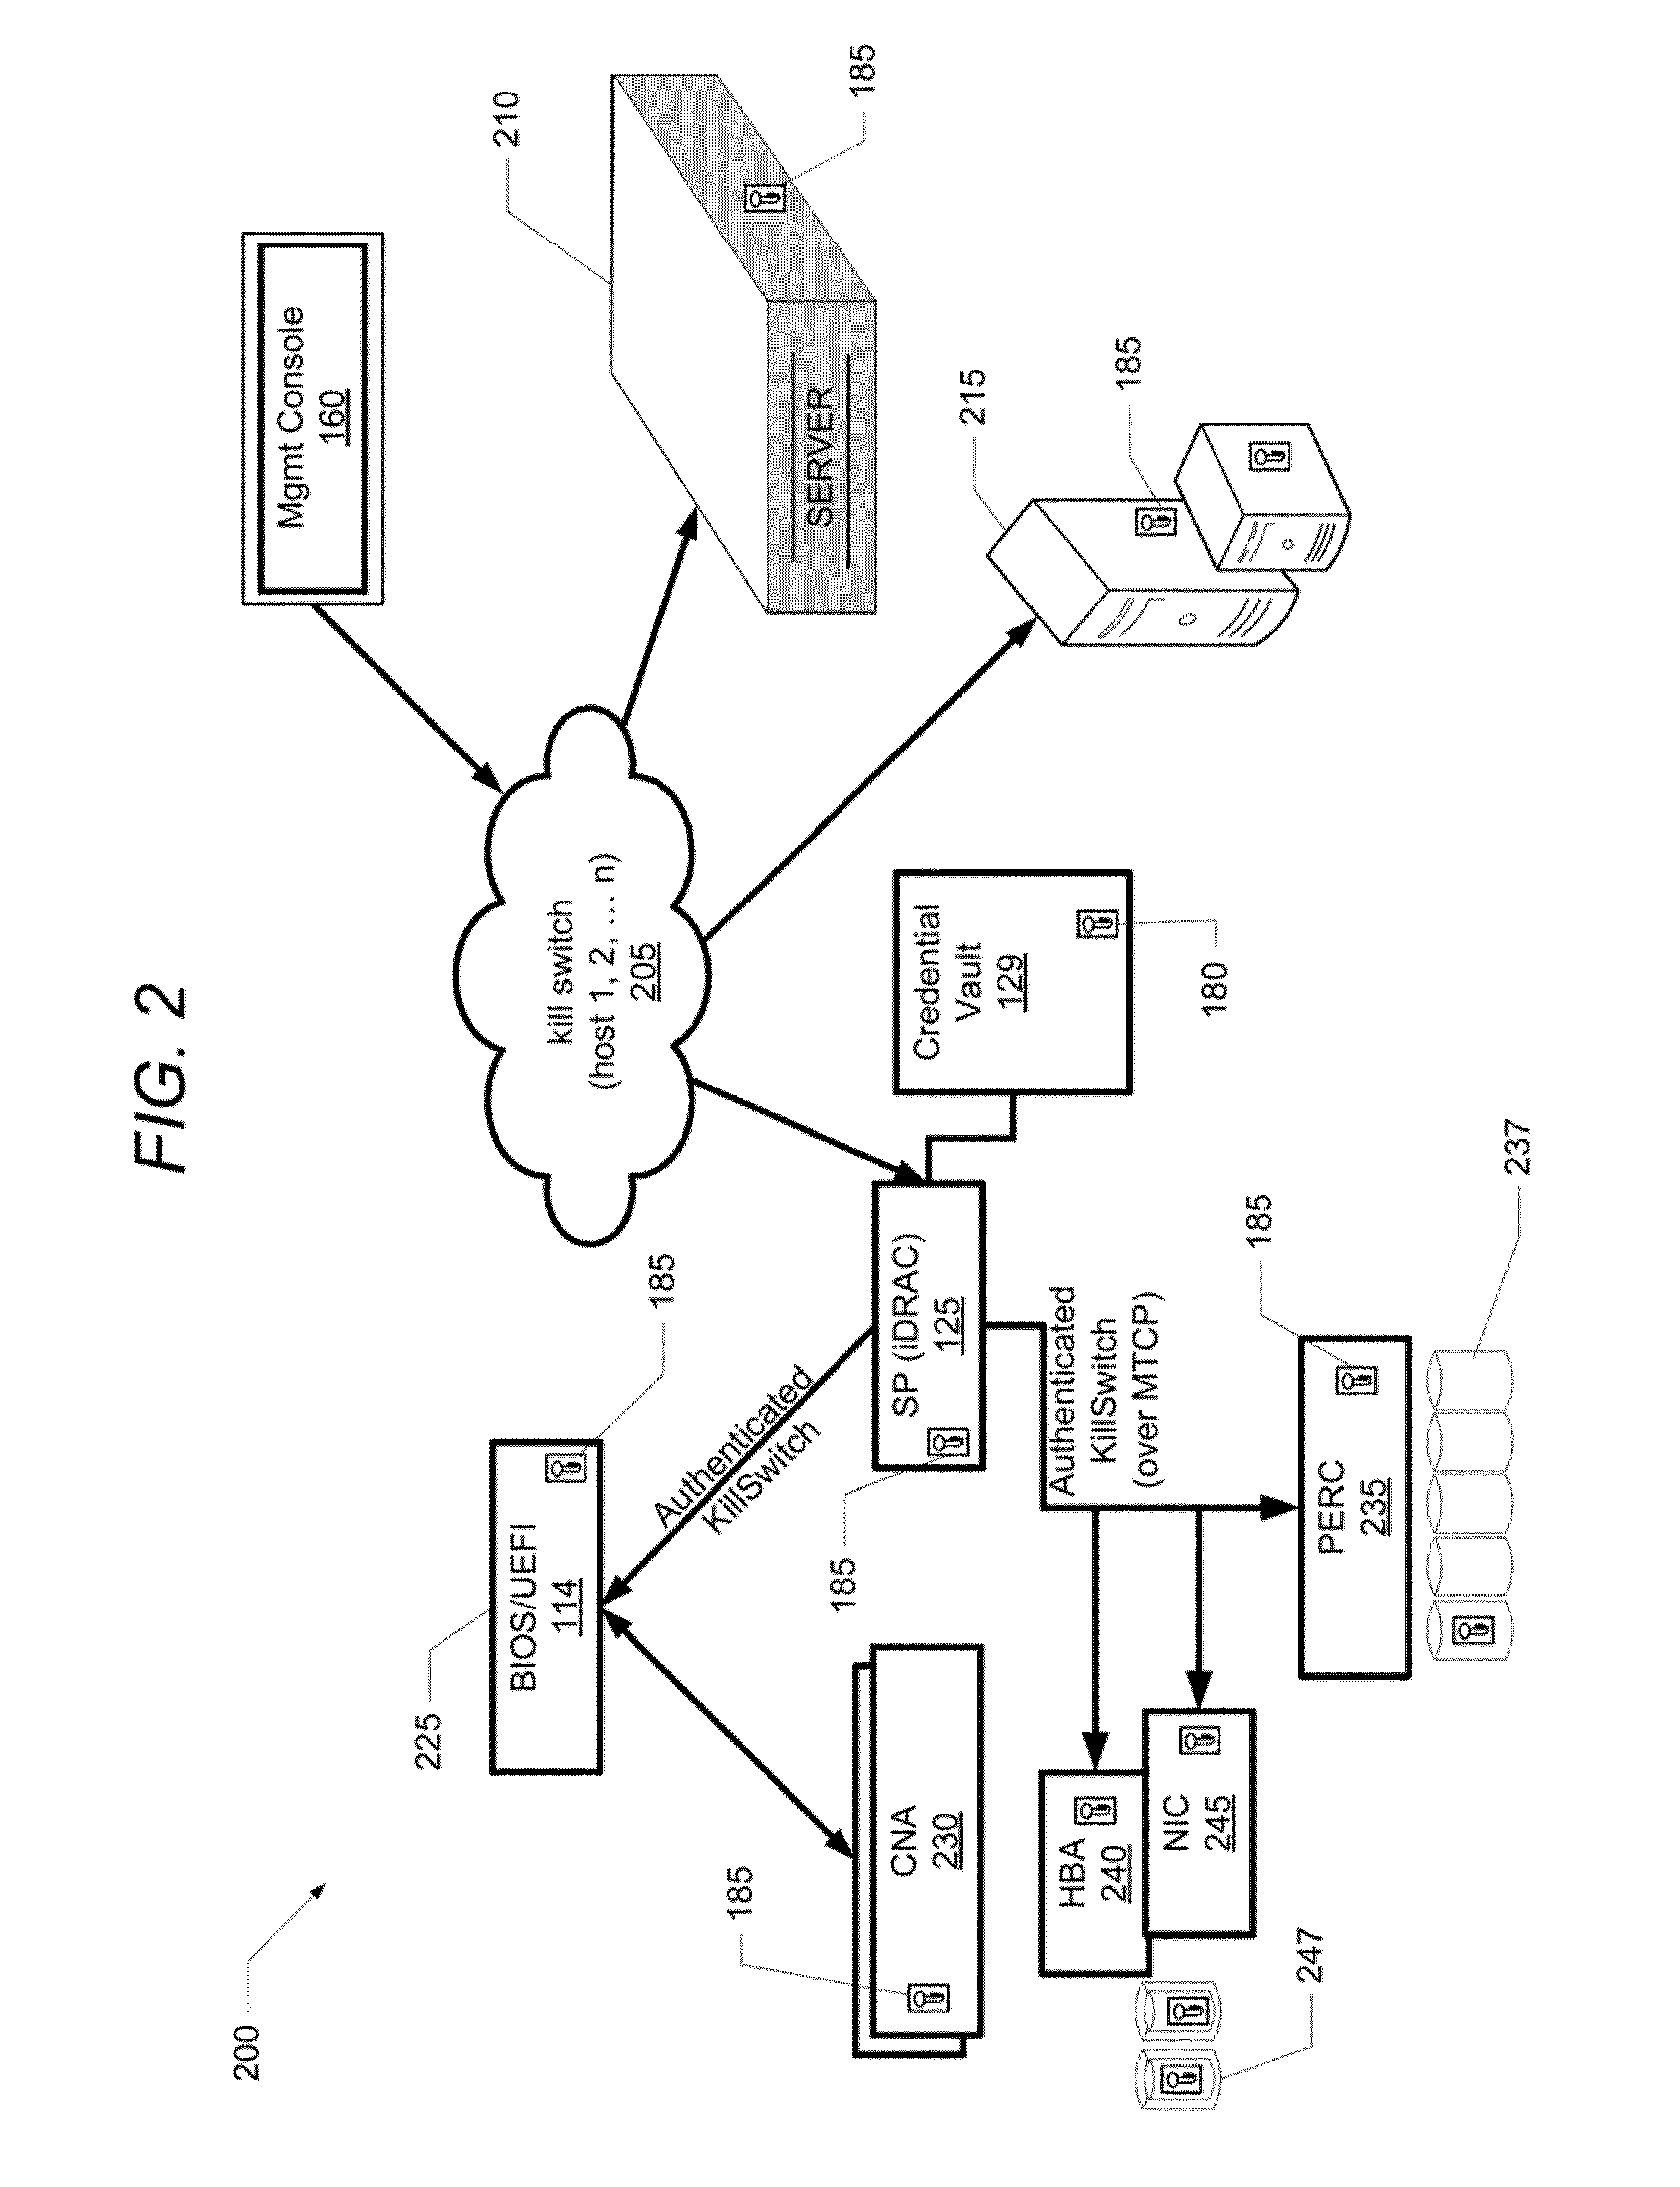 Single command functionality for providing data security and preventing data access within a decommisioned information handling system